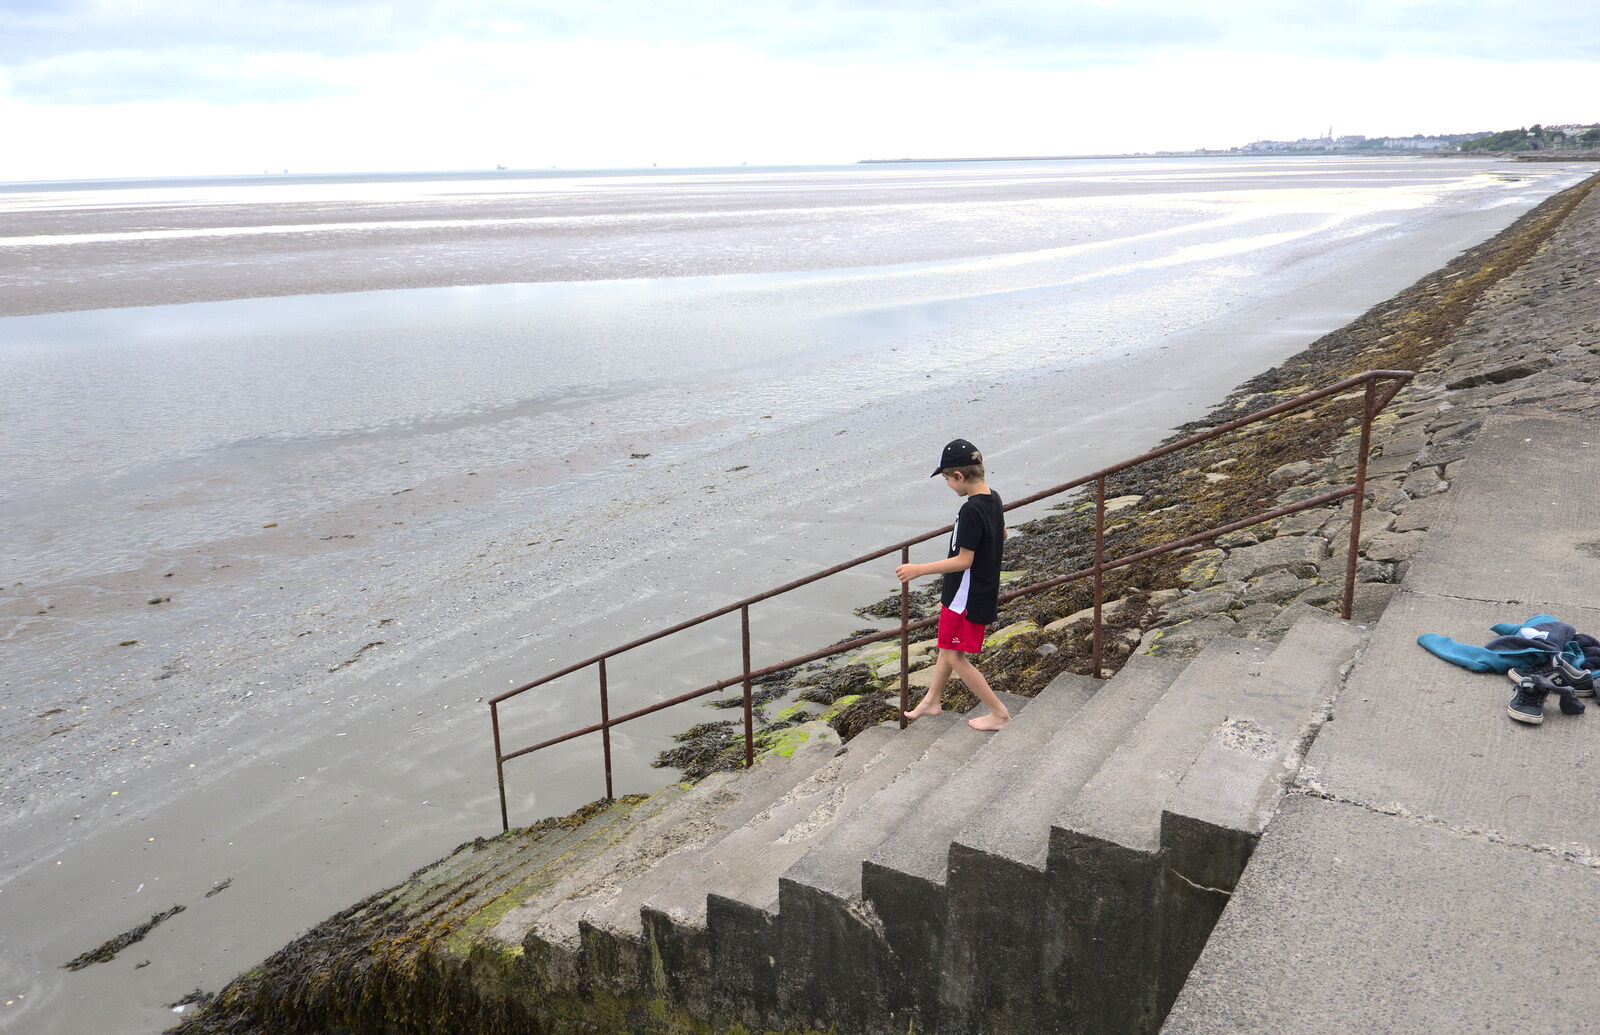 Fred walks down the steps to the mudflats from A Trip to Da Gorls, Monkstown Farm, County Dublin, Ireland - 4th August 2018